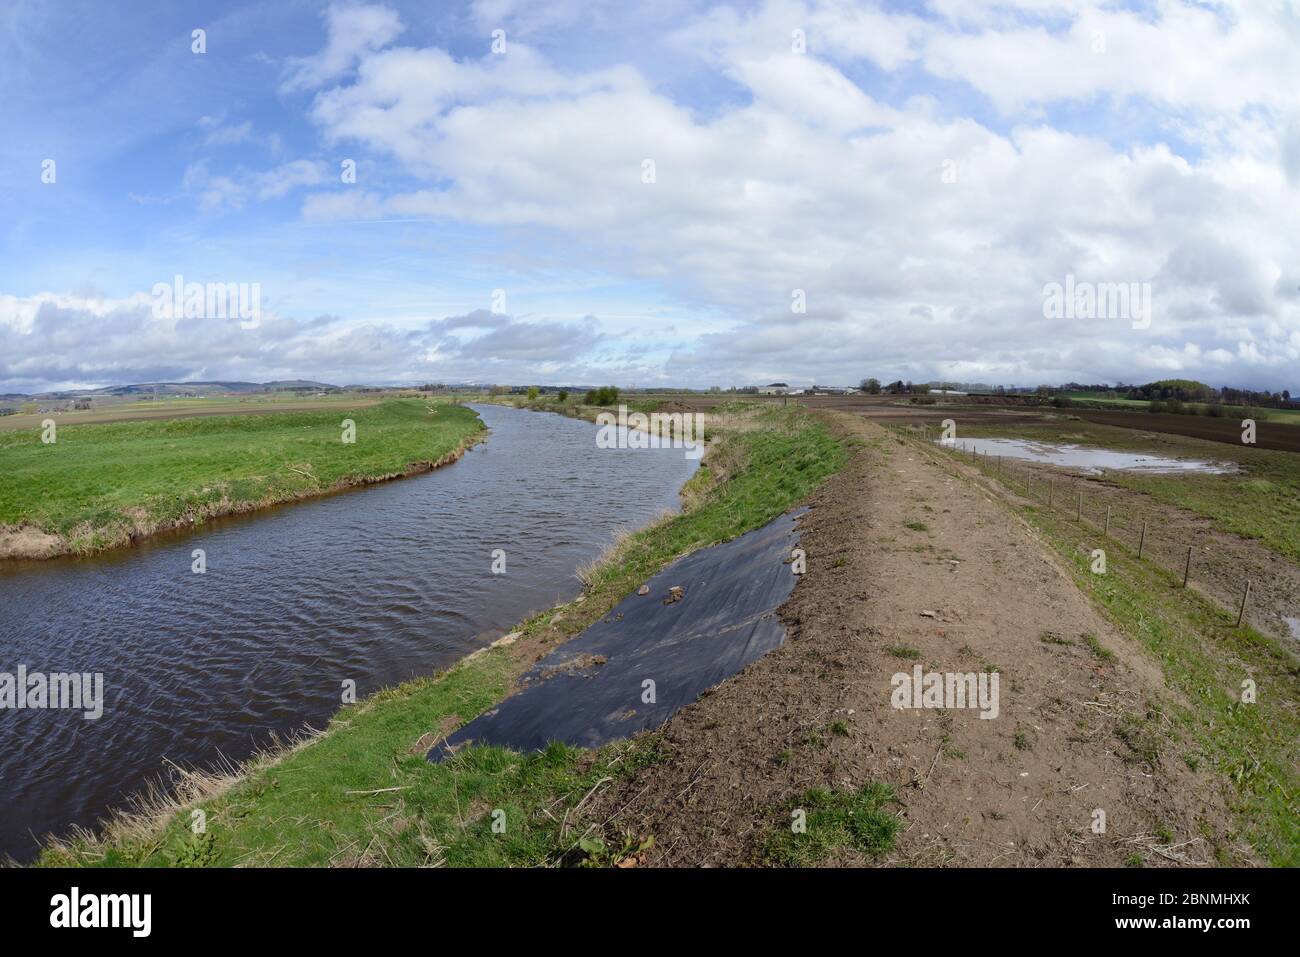 Flood defence dyke repaired after major breach during winter storms led to arable farmland becoming flooded in an area where Eurasian beavers (Castor Stock Photo